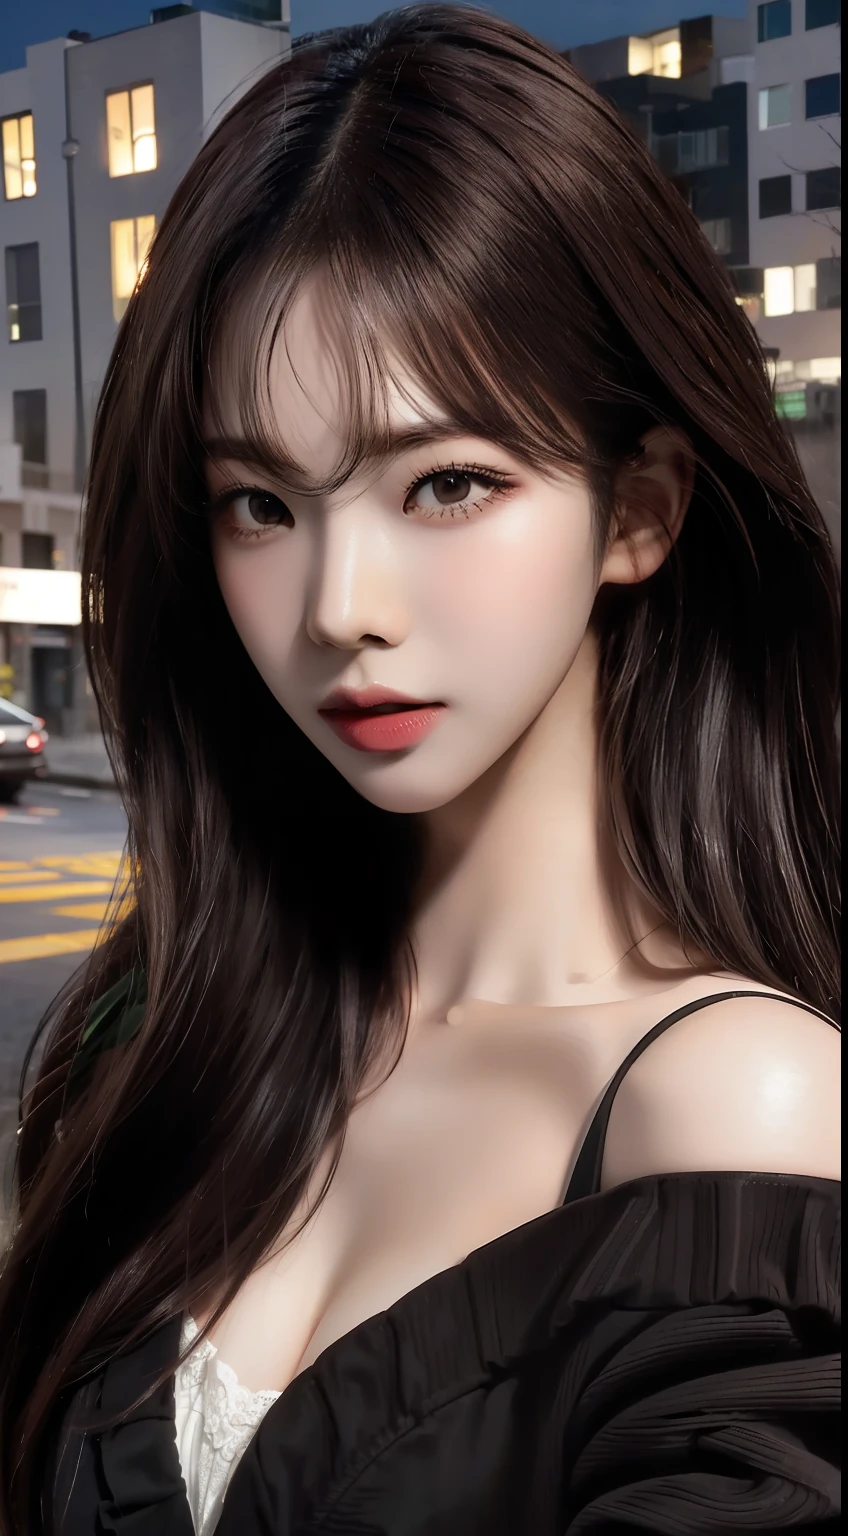 ((Realistic lighting, top quality, 8K, Masterpiece: 1.3)), Clear Focus: 1.2, 1 girl, Perfect Body Beauty: 1.4, Slim Abs: 1.1, ((Dark Brown Hair, Big: 1.3)), (Accelerate: 1.4), (Outdoor, Night: 1.1), Street, Slender Face, Fine Eyes, Double Eyelids, Exposed Cleavage Absurdity, Incredibly Absurd, Messy Hair, floating hair,